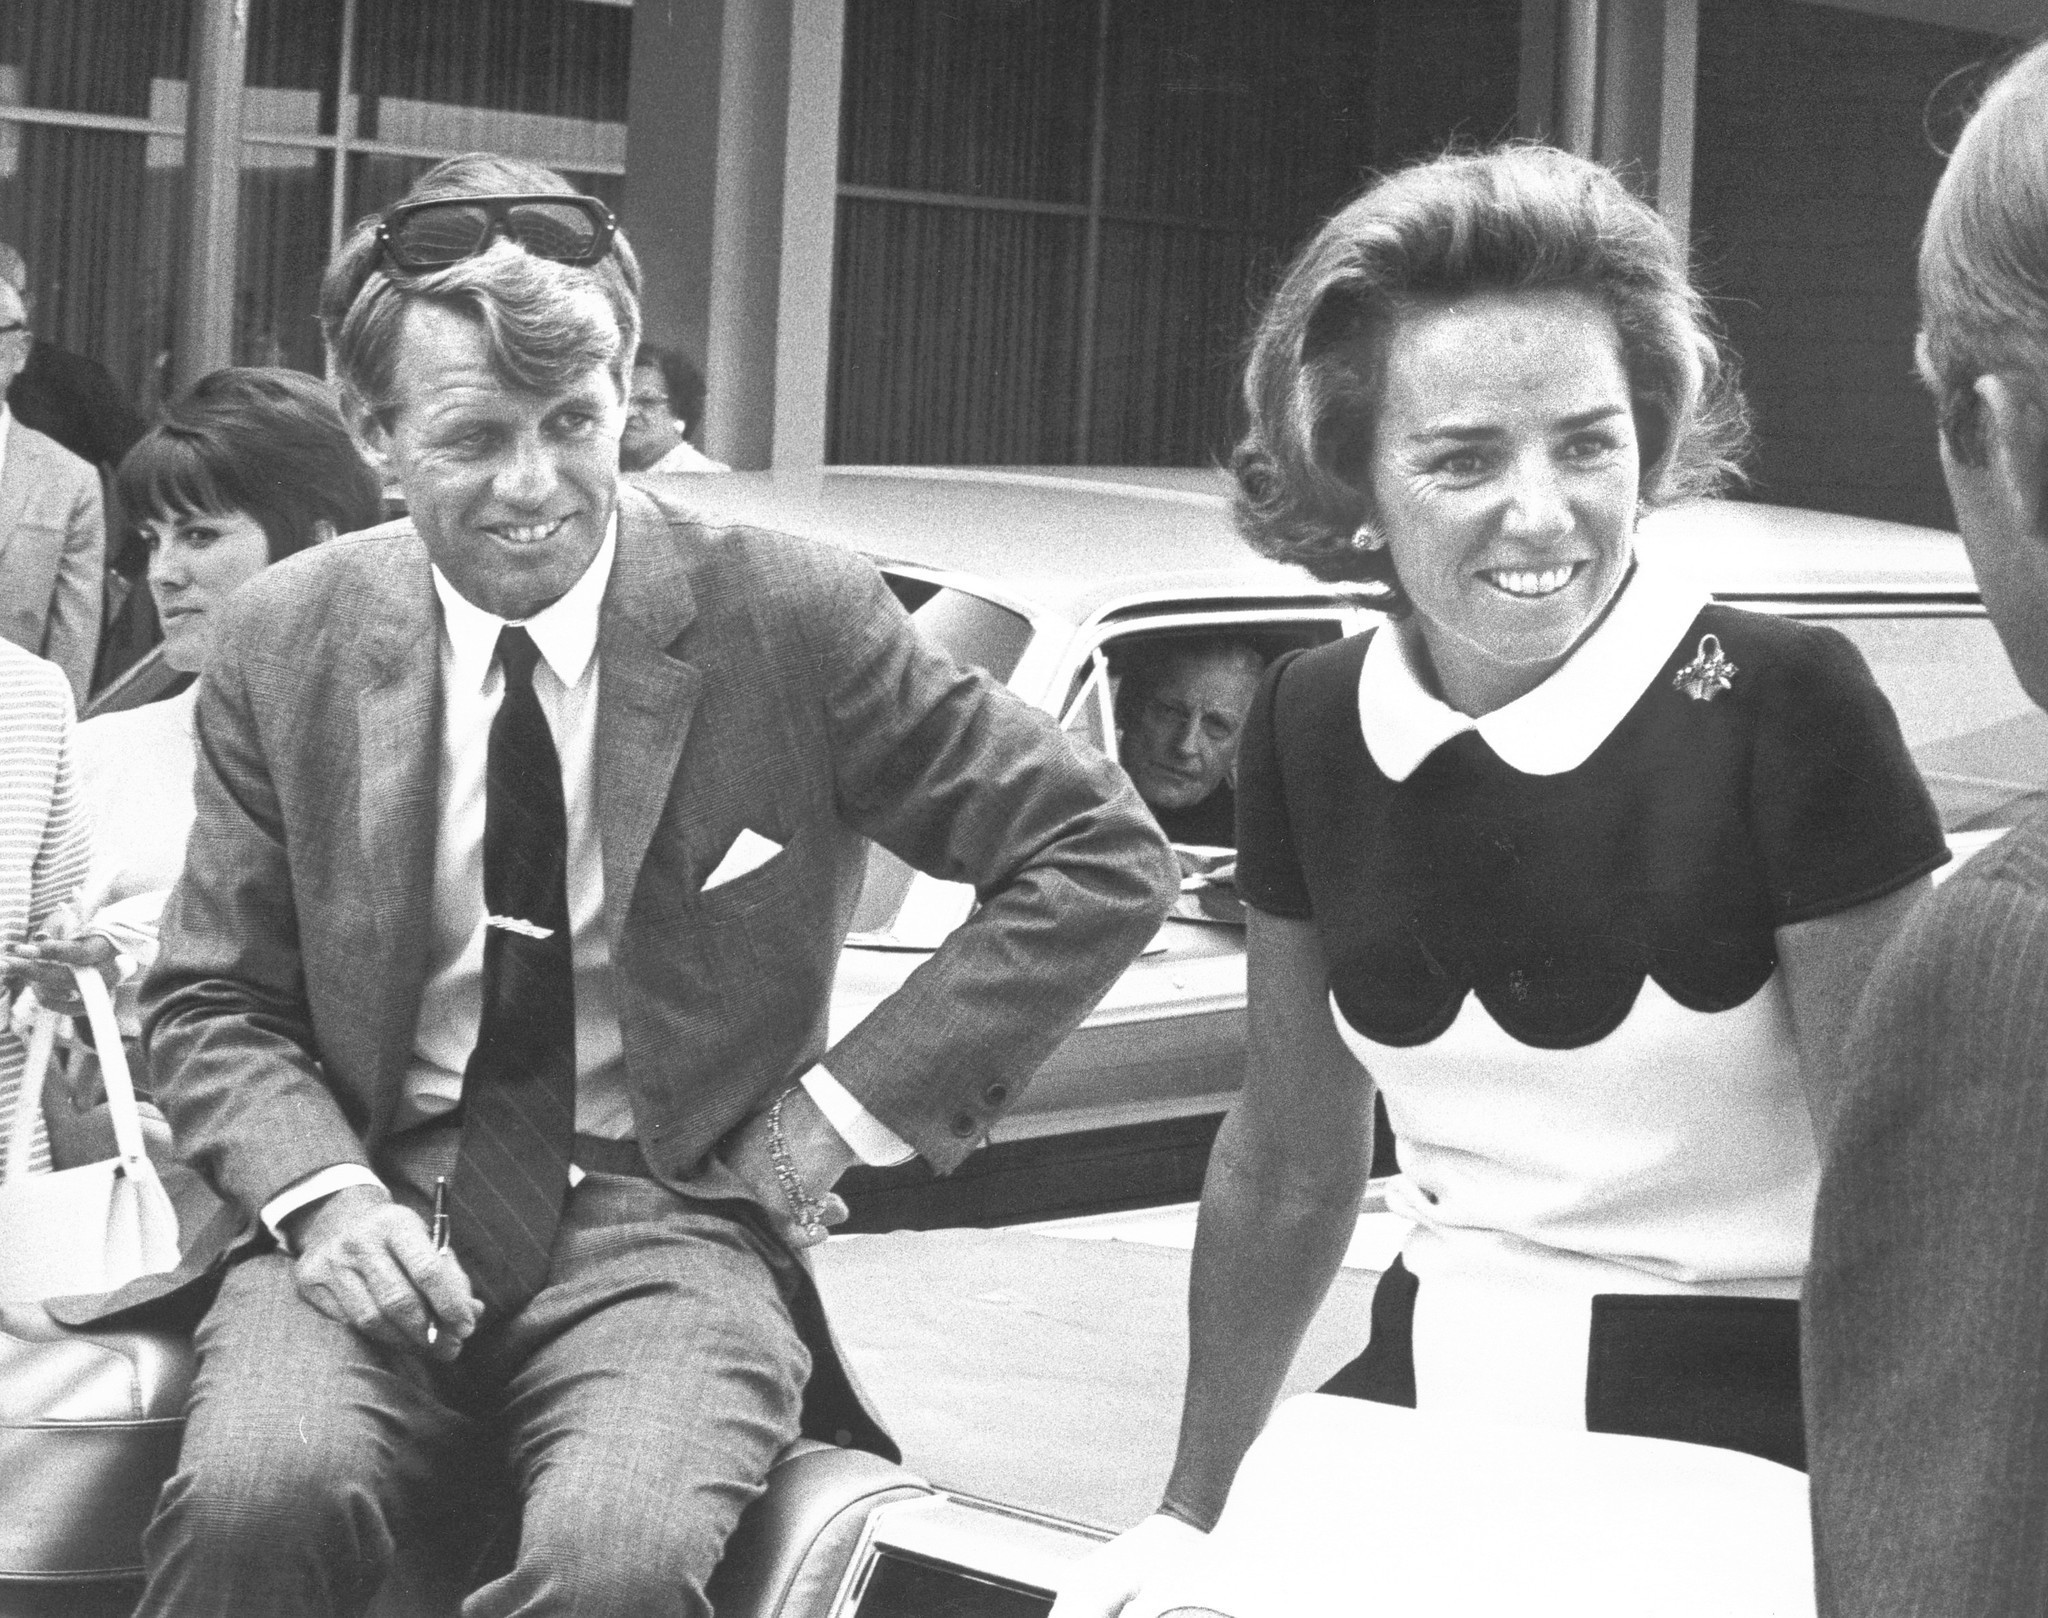 Robert Kennedy biography charts making of a 'liberal icon' - Chicago ...